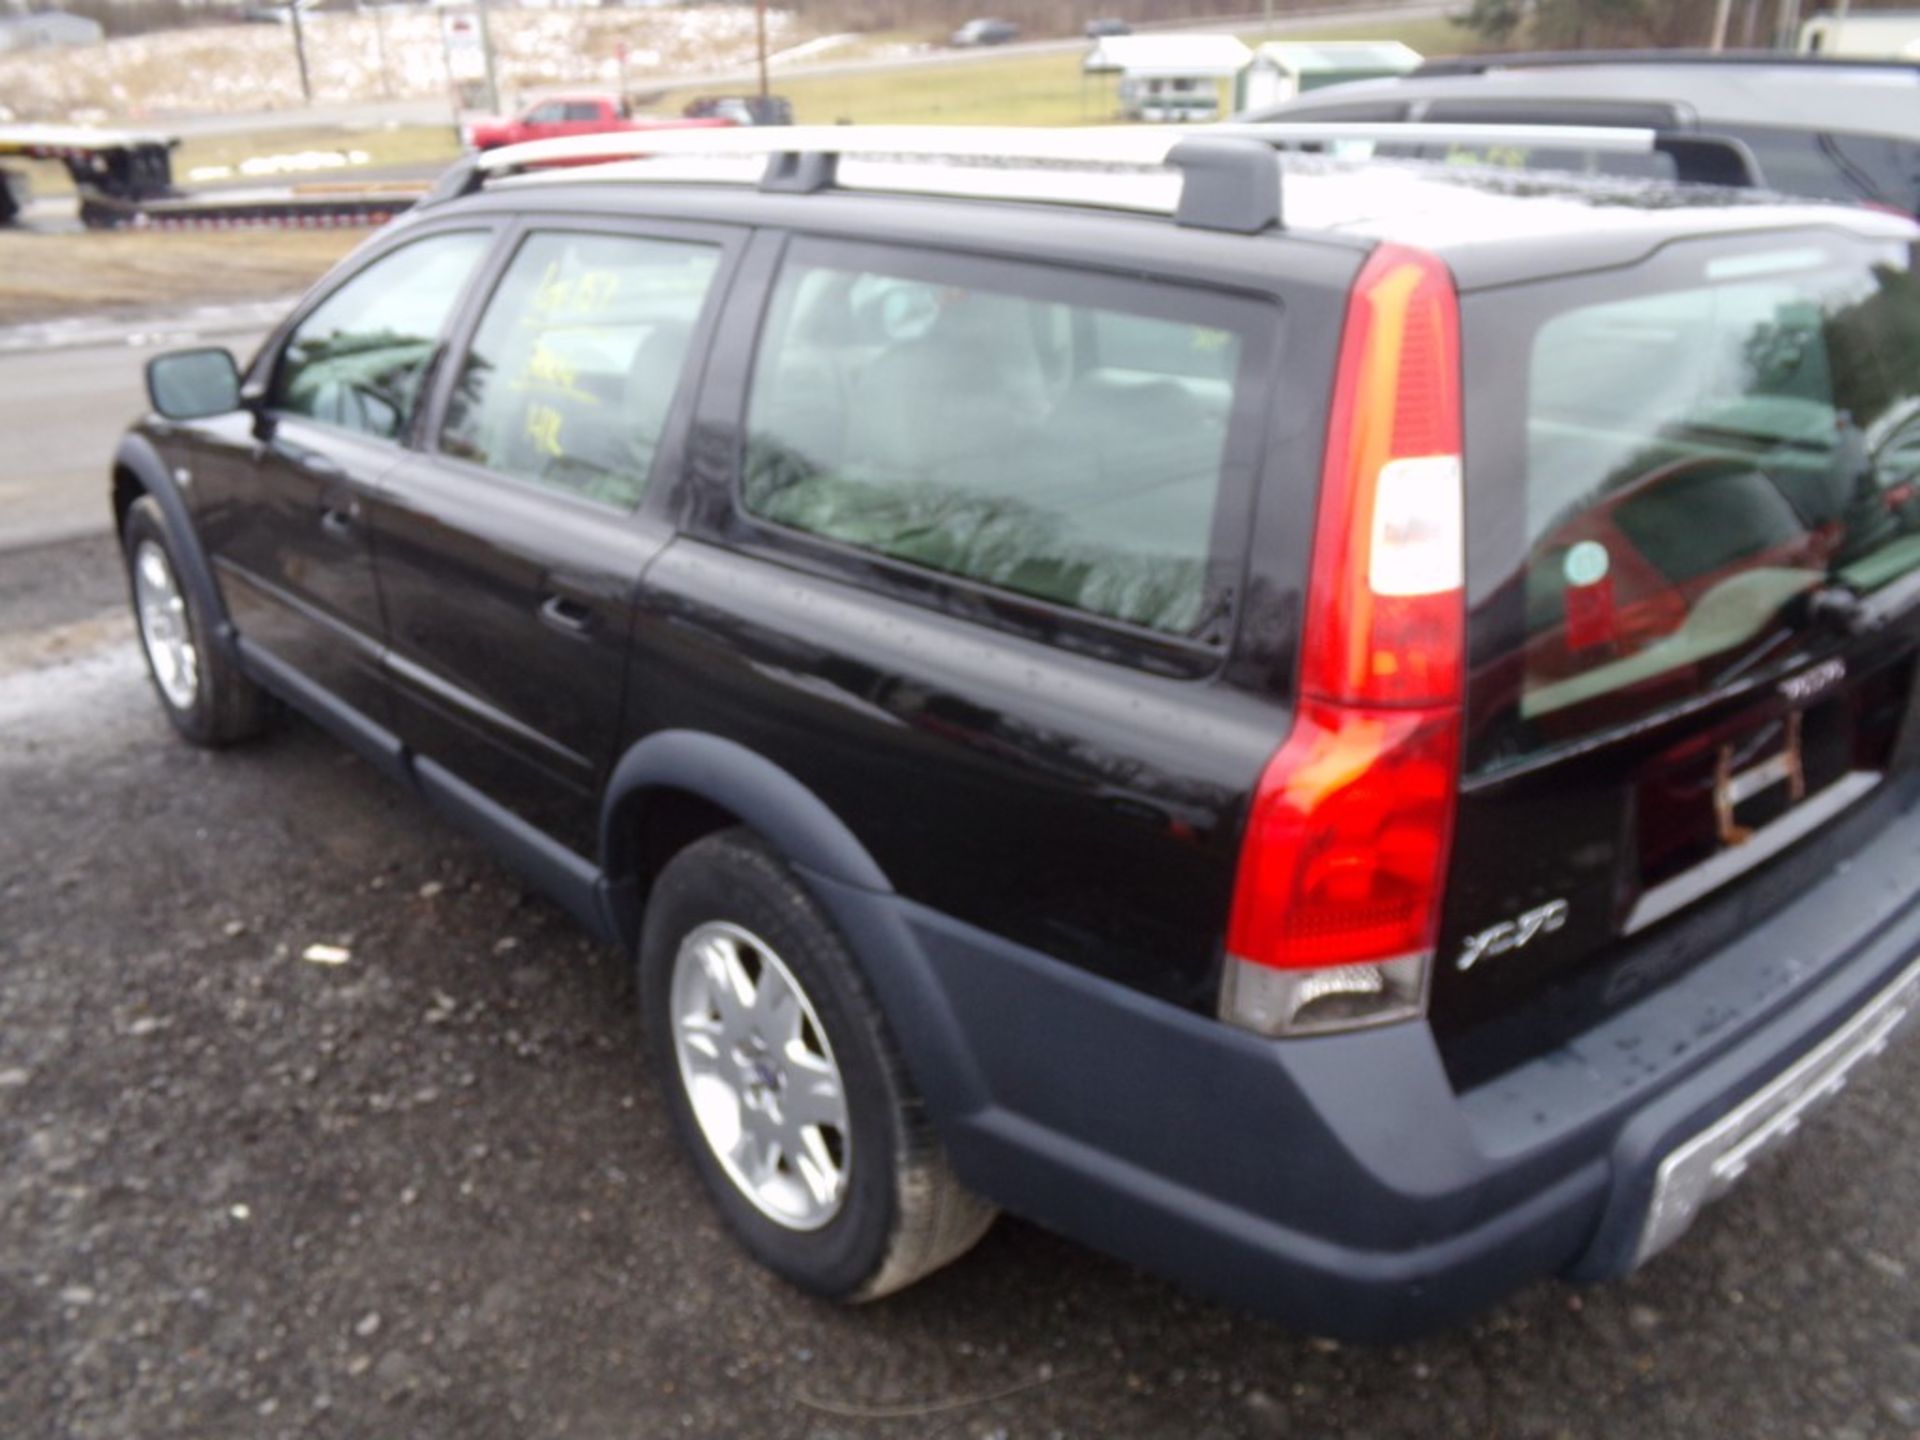 2006 Volvo XC70 Cross Country, AWD, Black, Leather, Sunroof, 141,548 Miles, VIN#: YV4SZ592261232485, - Image 2 of 4